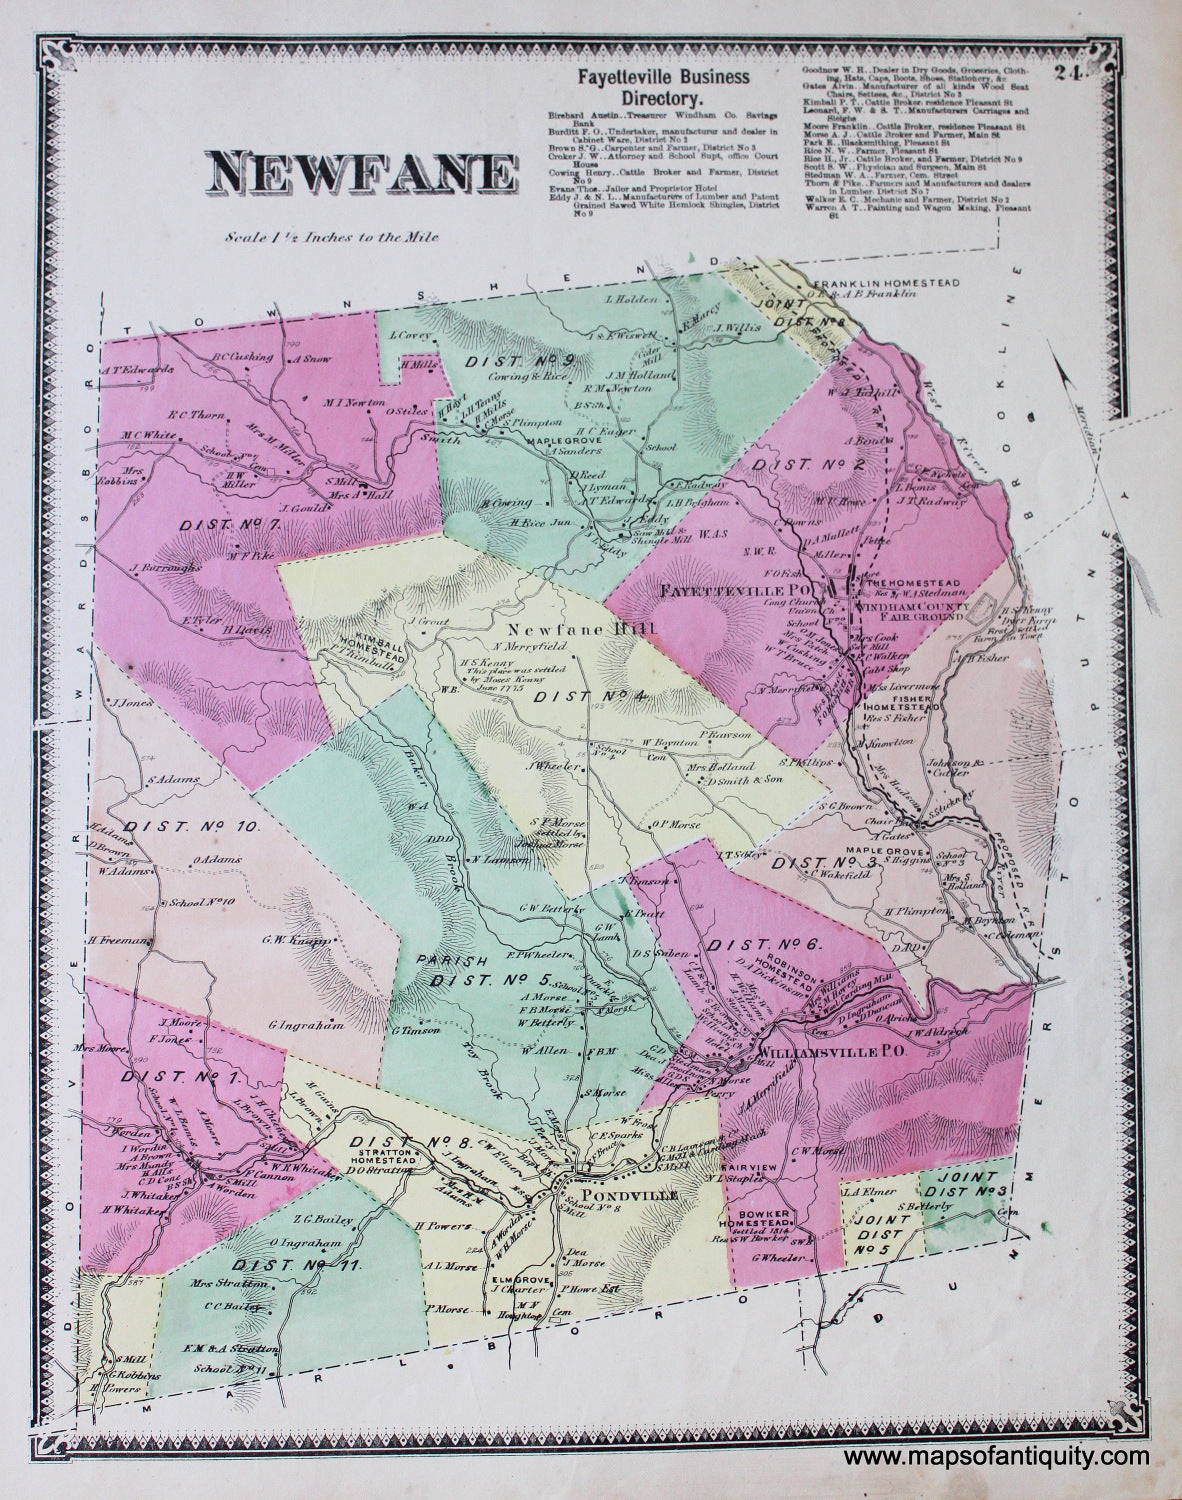 Antique-Hand-Colored-Map-Newfane-VT---Vermont-United-States-Northeast-1869-Beers-Maps-Of-Antiquity